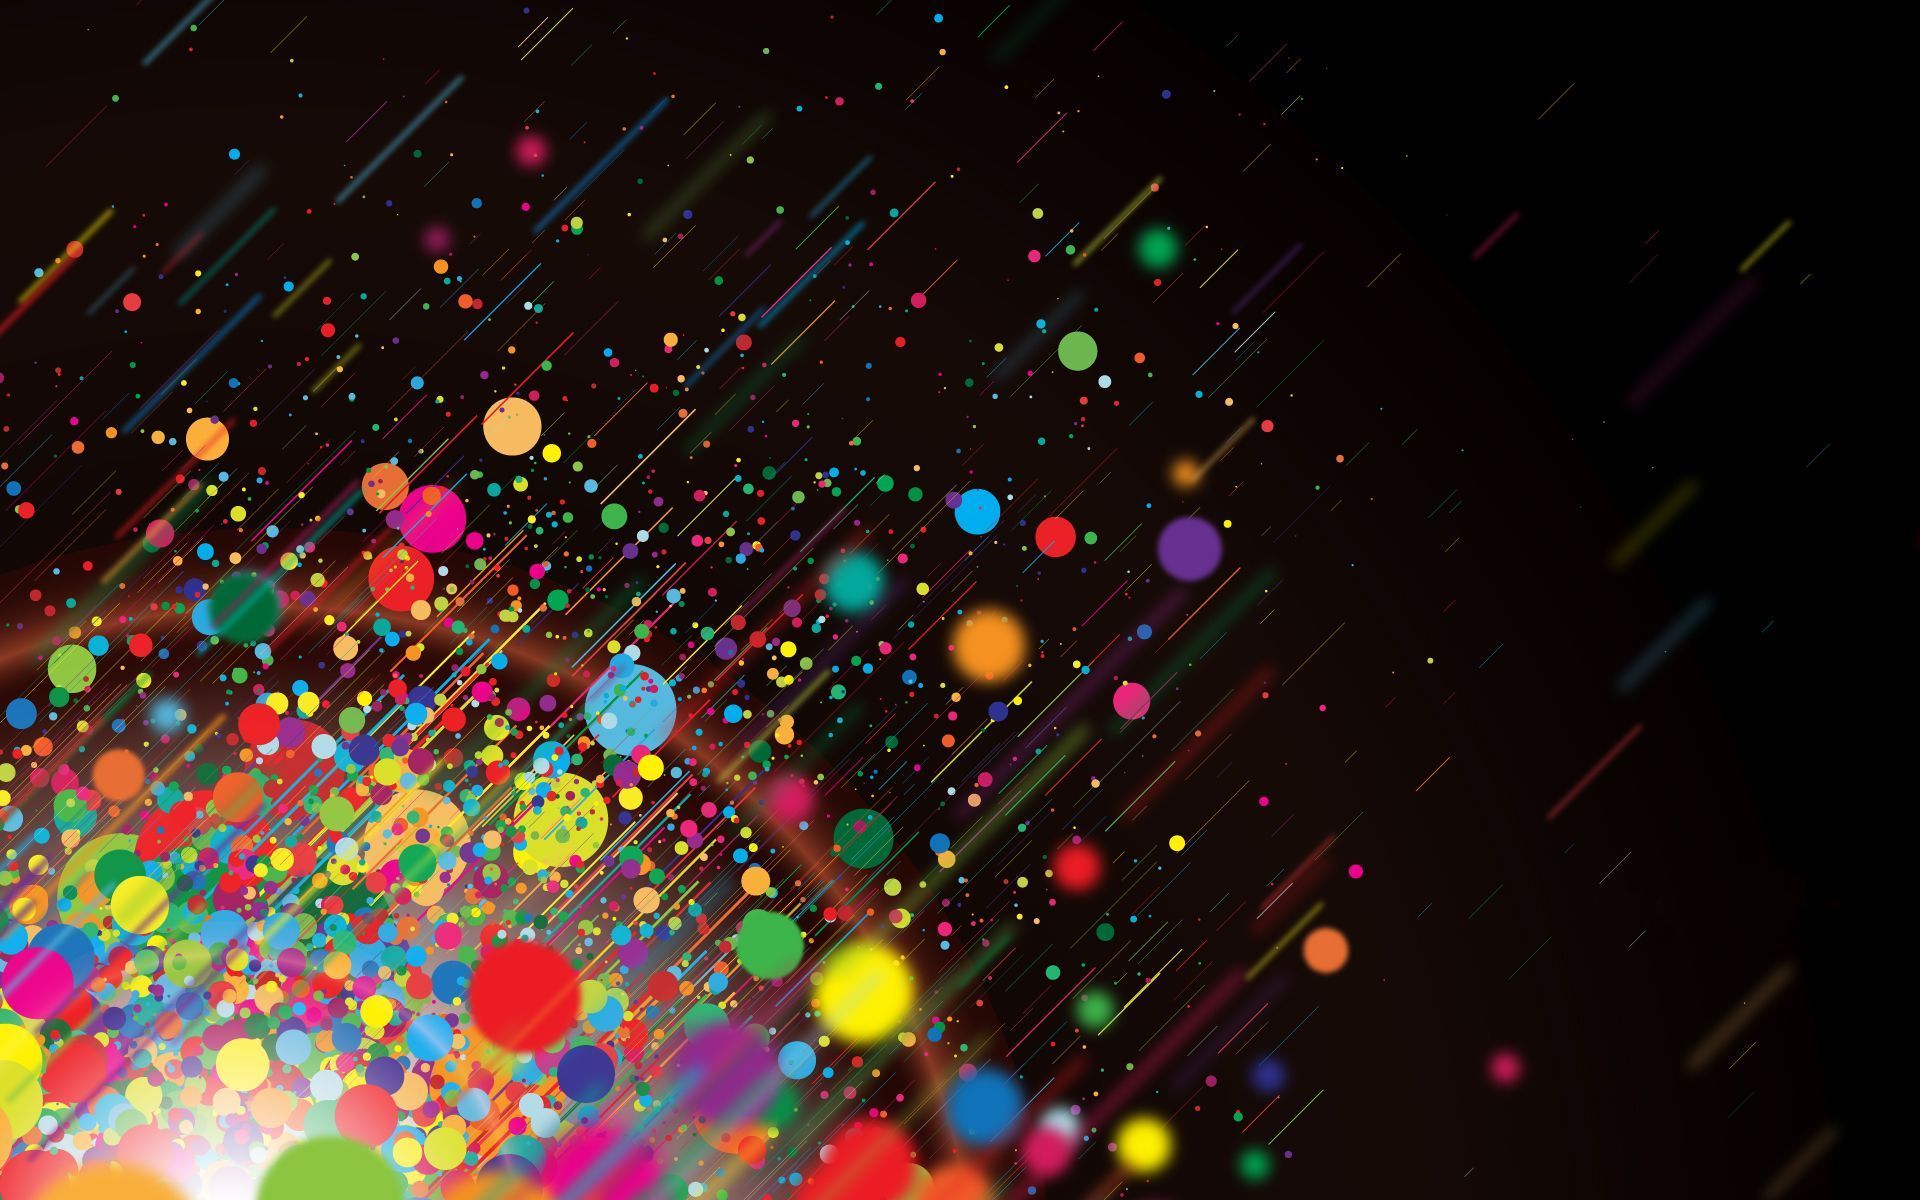 Colors Explosion Abstract 3D wallpaper | 1920x1200 | #82209